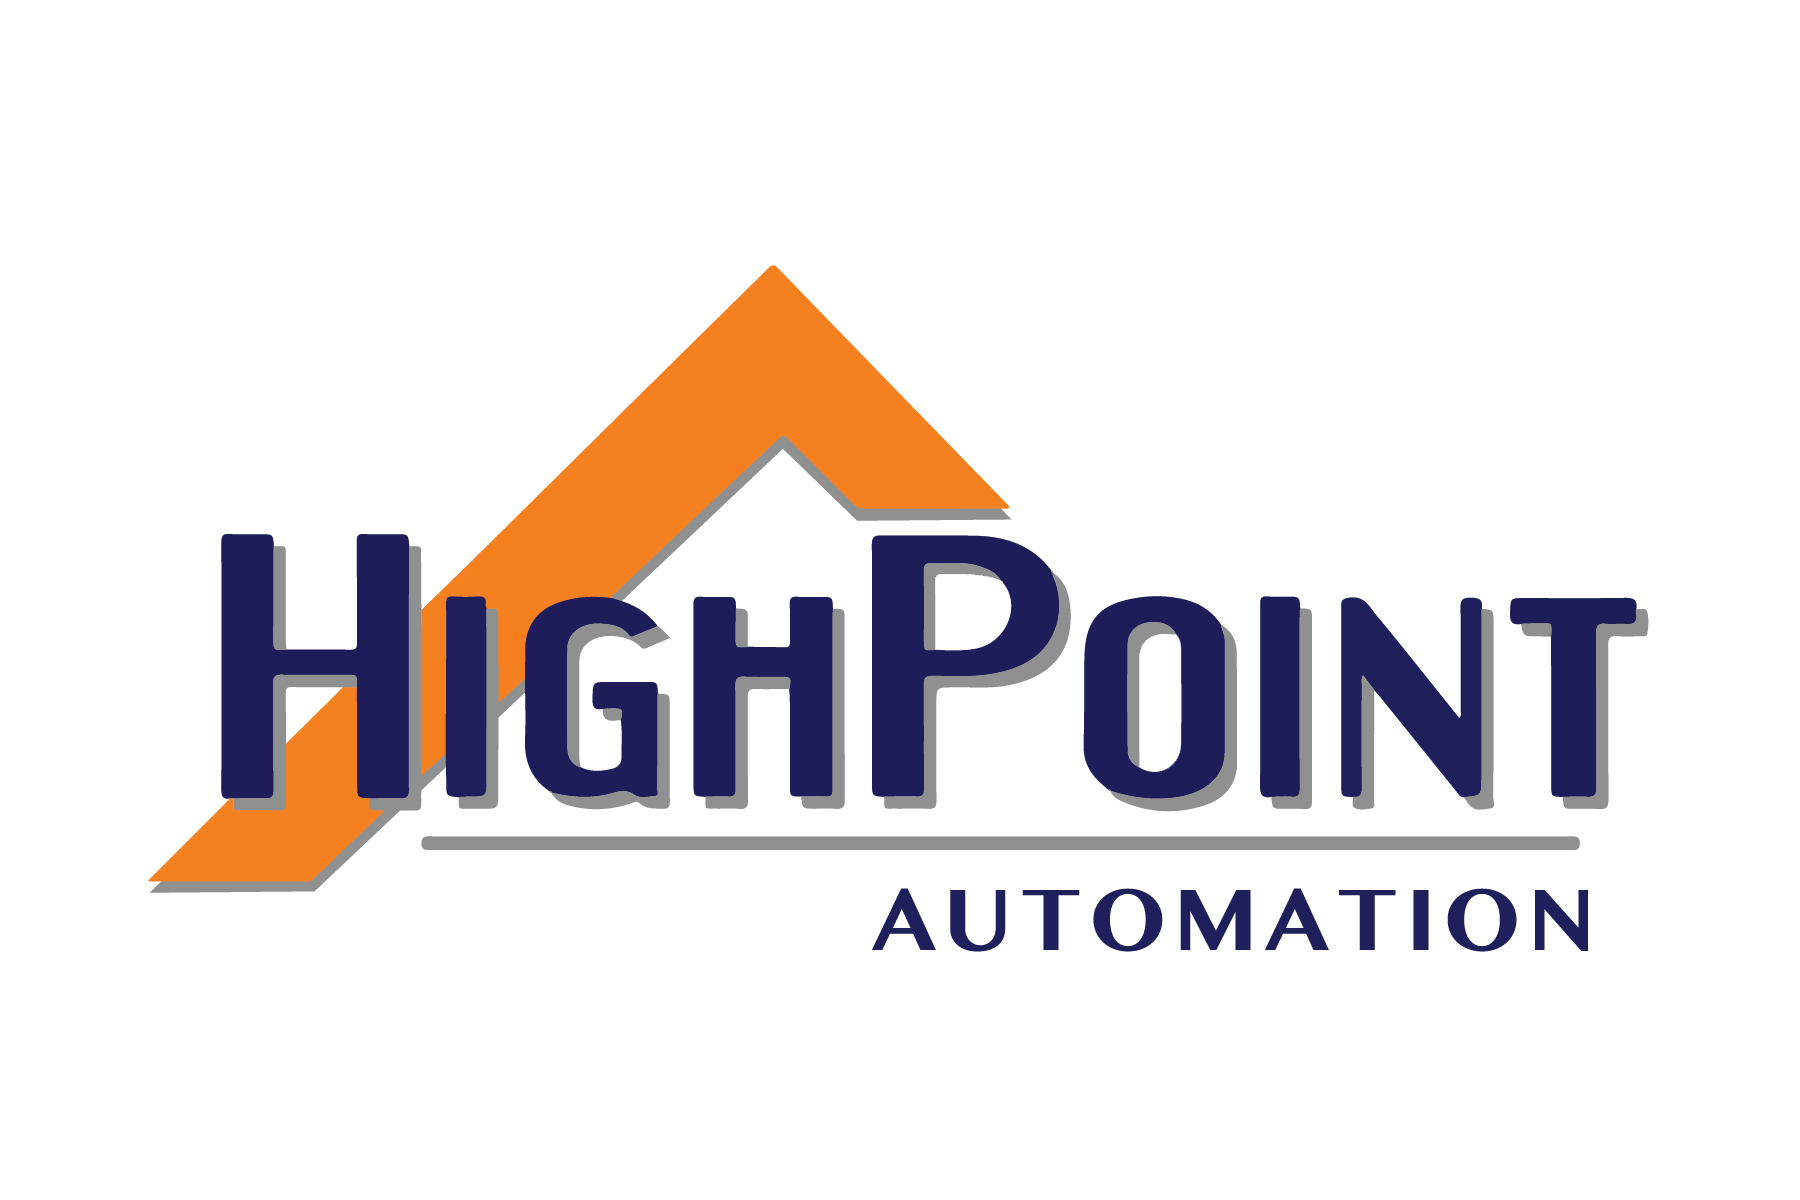 HighPoint_Automation-.png